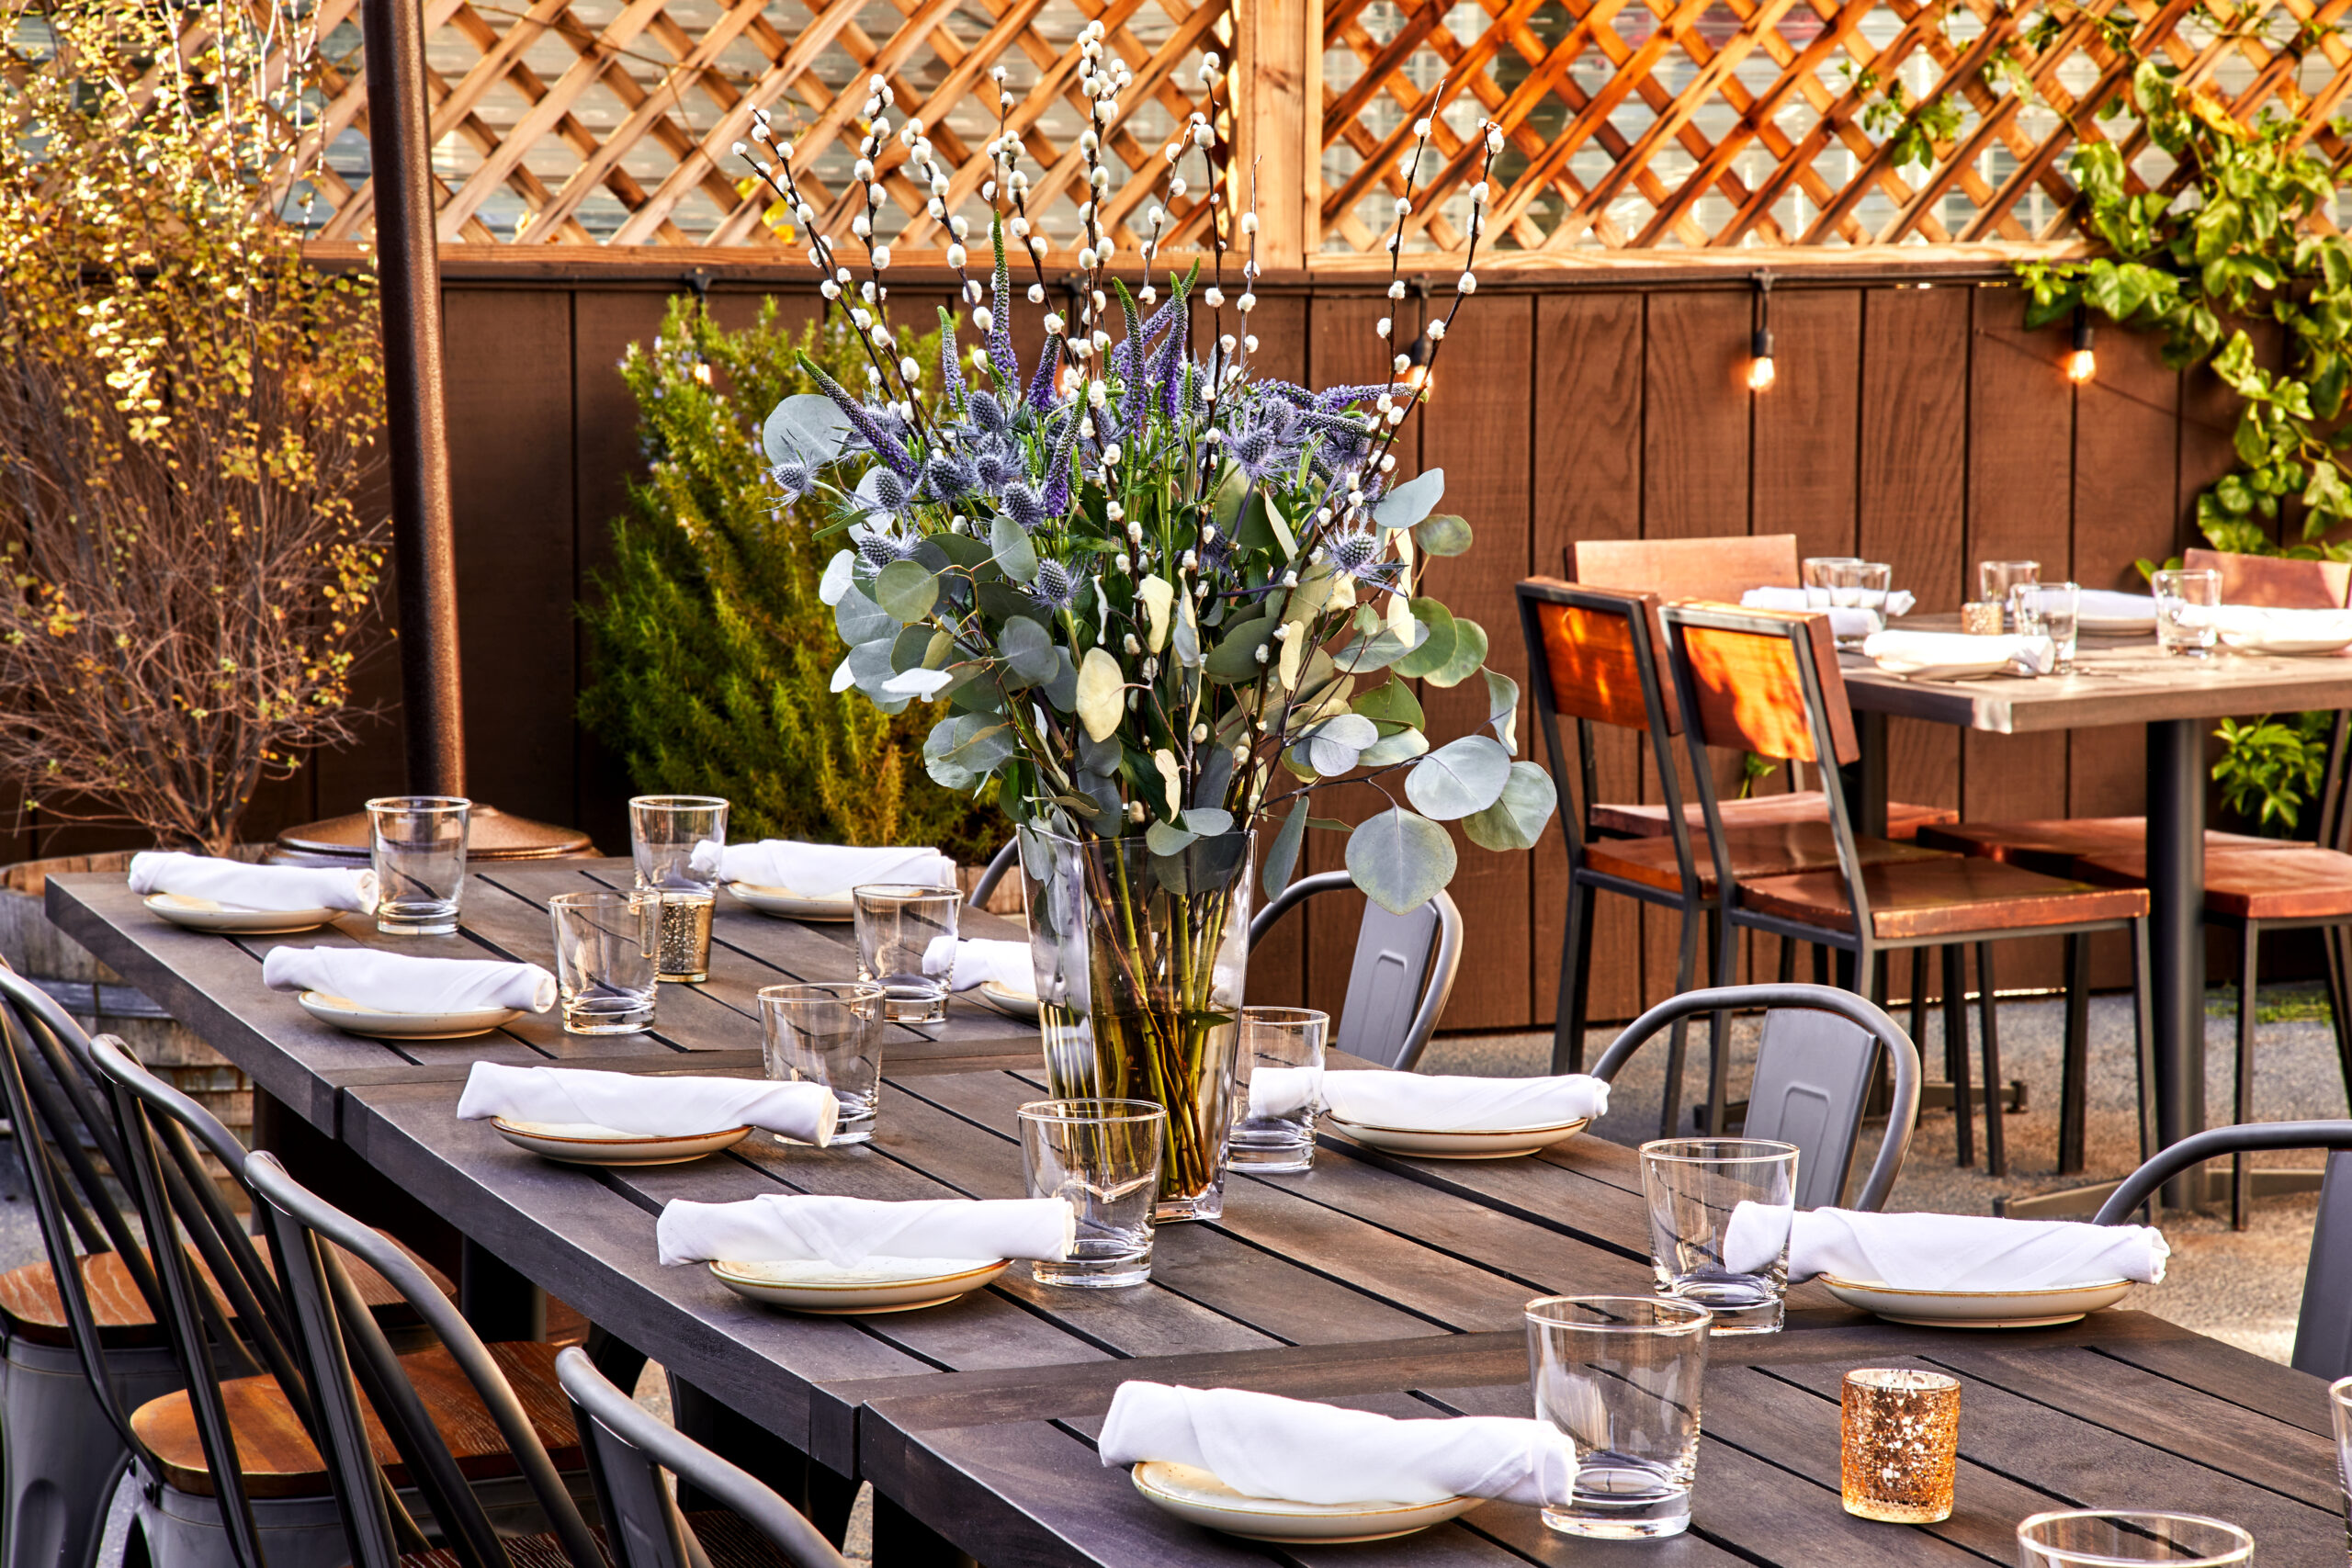 Rustic Canyon's back patio with twinkle lights, tables, chairs and a fresh eucalyptus centerpiece